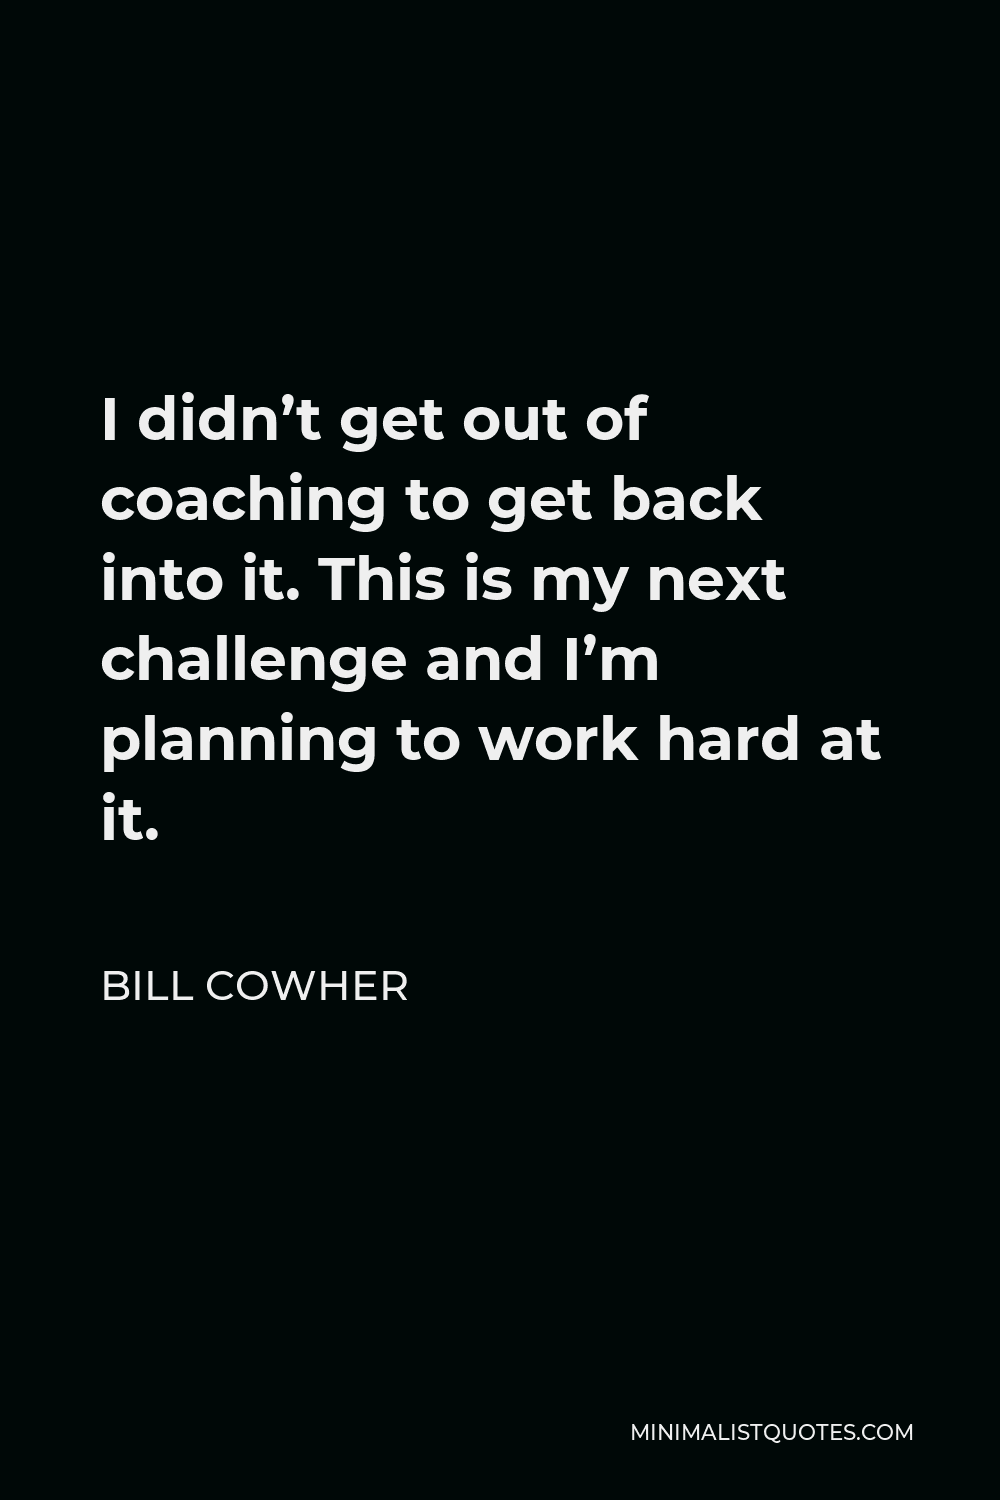 Bill Cowher Quote - I didn’t get out of coaching to get back into it. This is my next challenge and I’m planning to work hard at it.